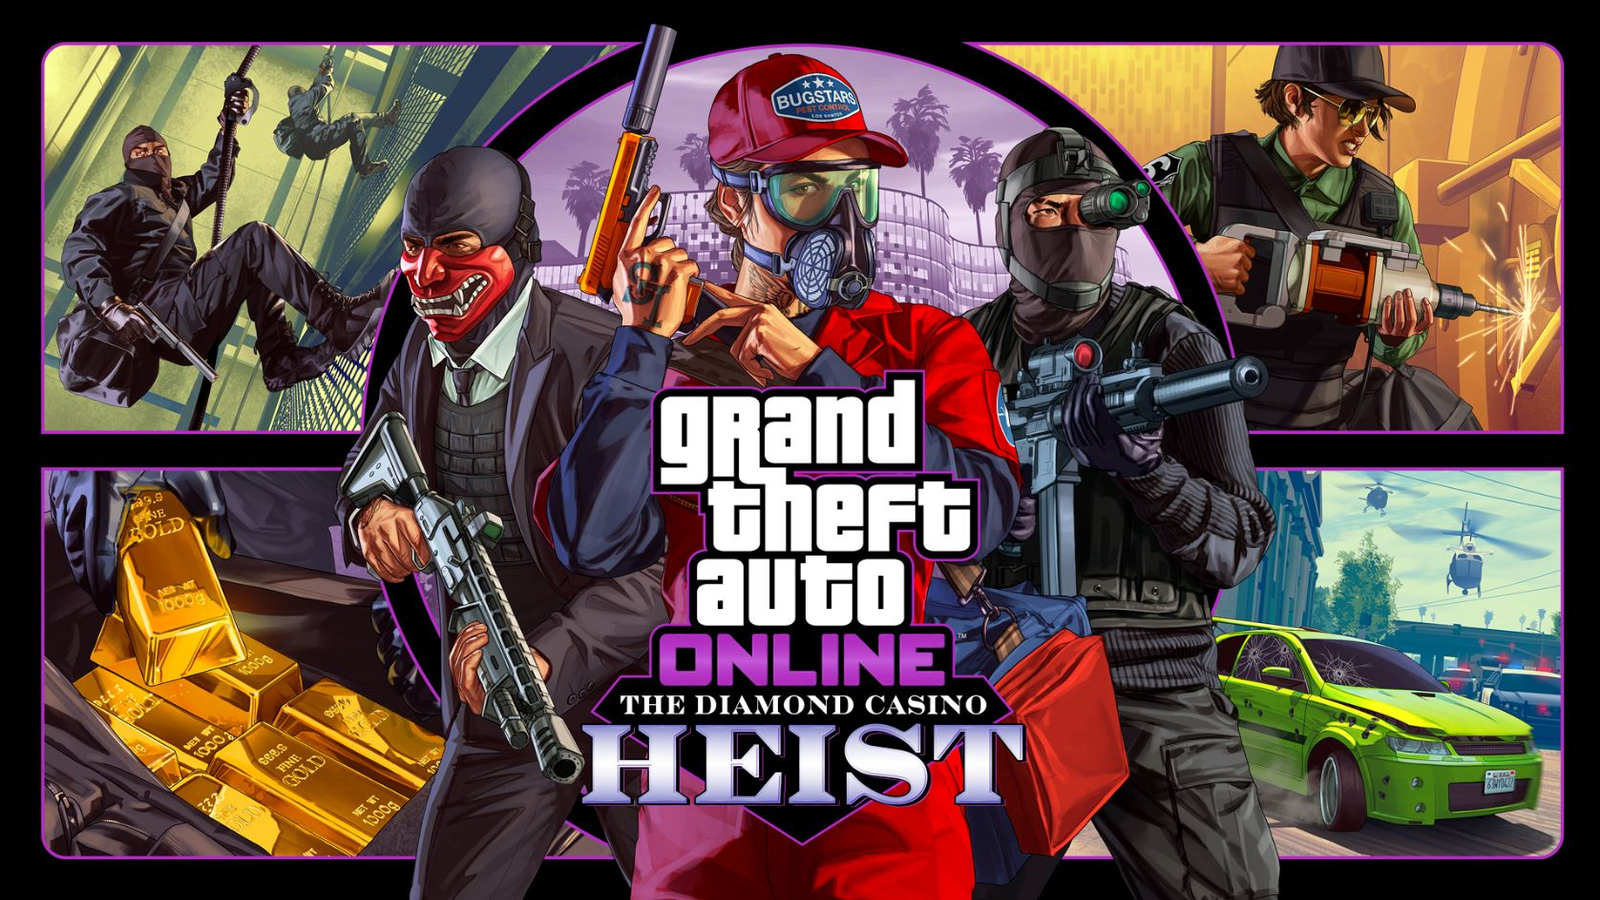 How To Claim GTA Online For Free On PlayStation 5